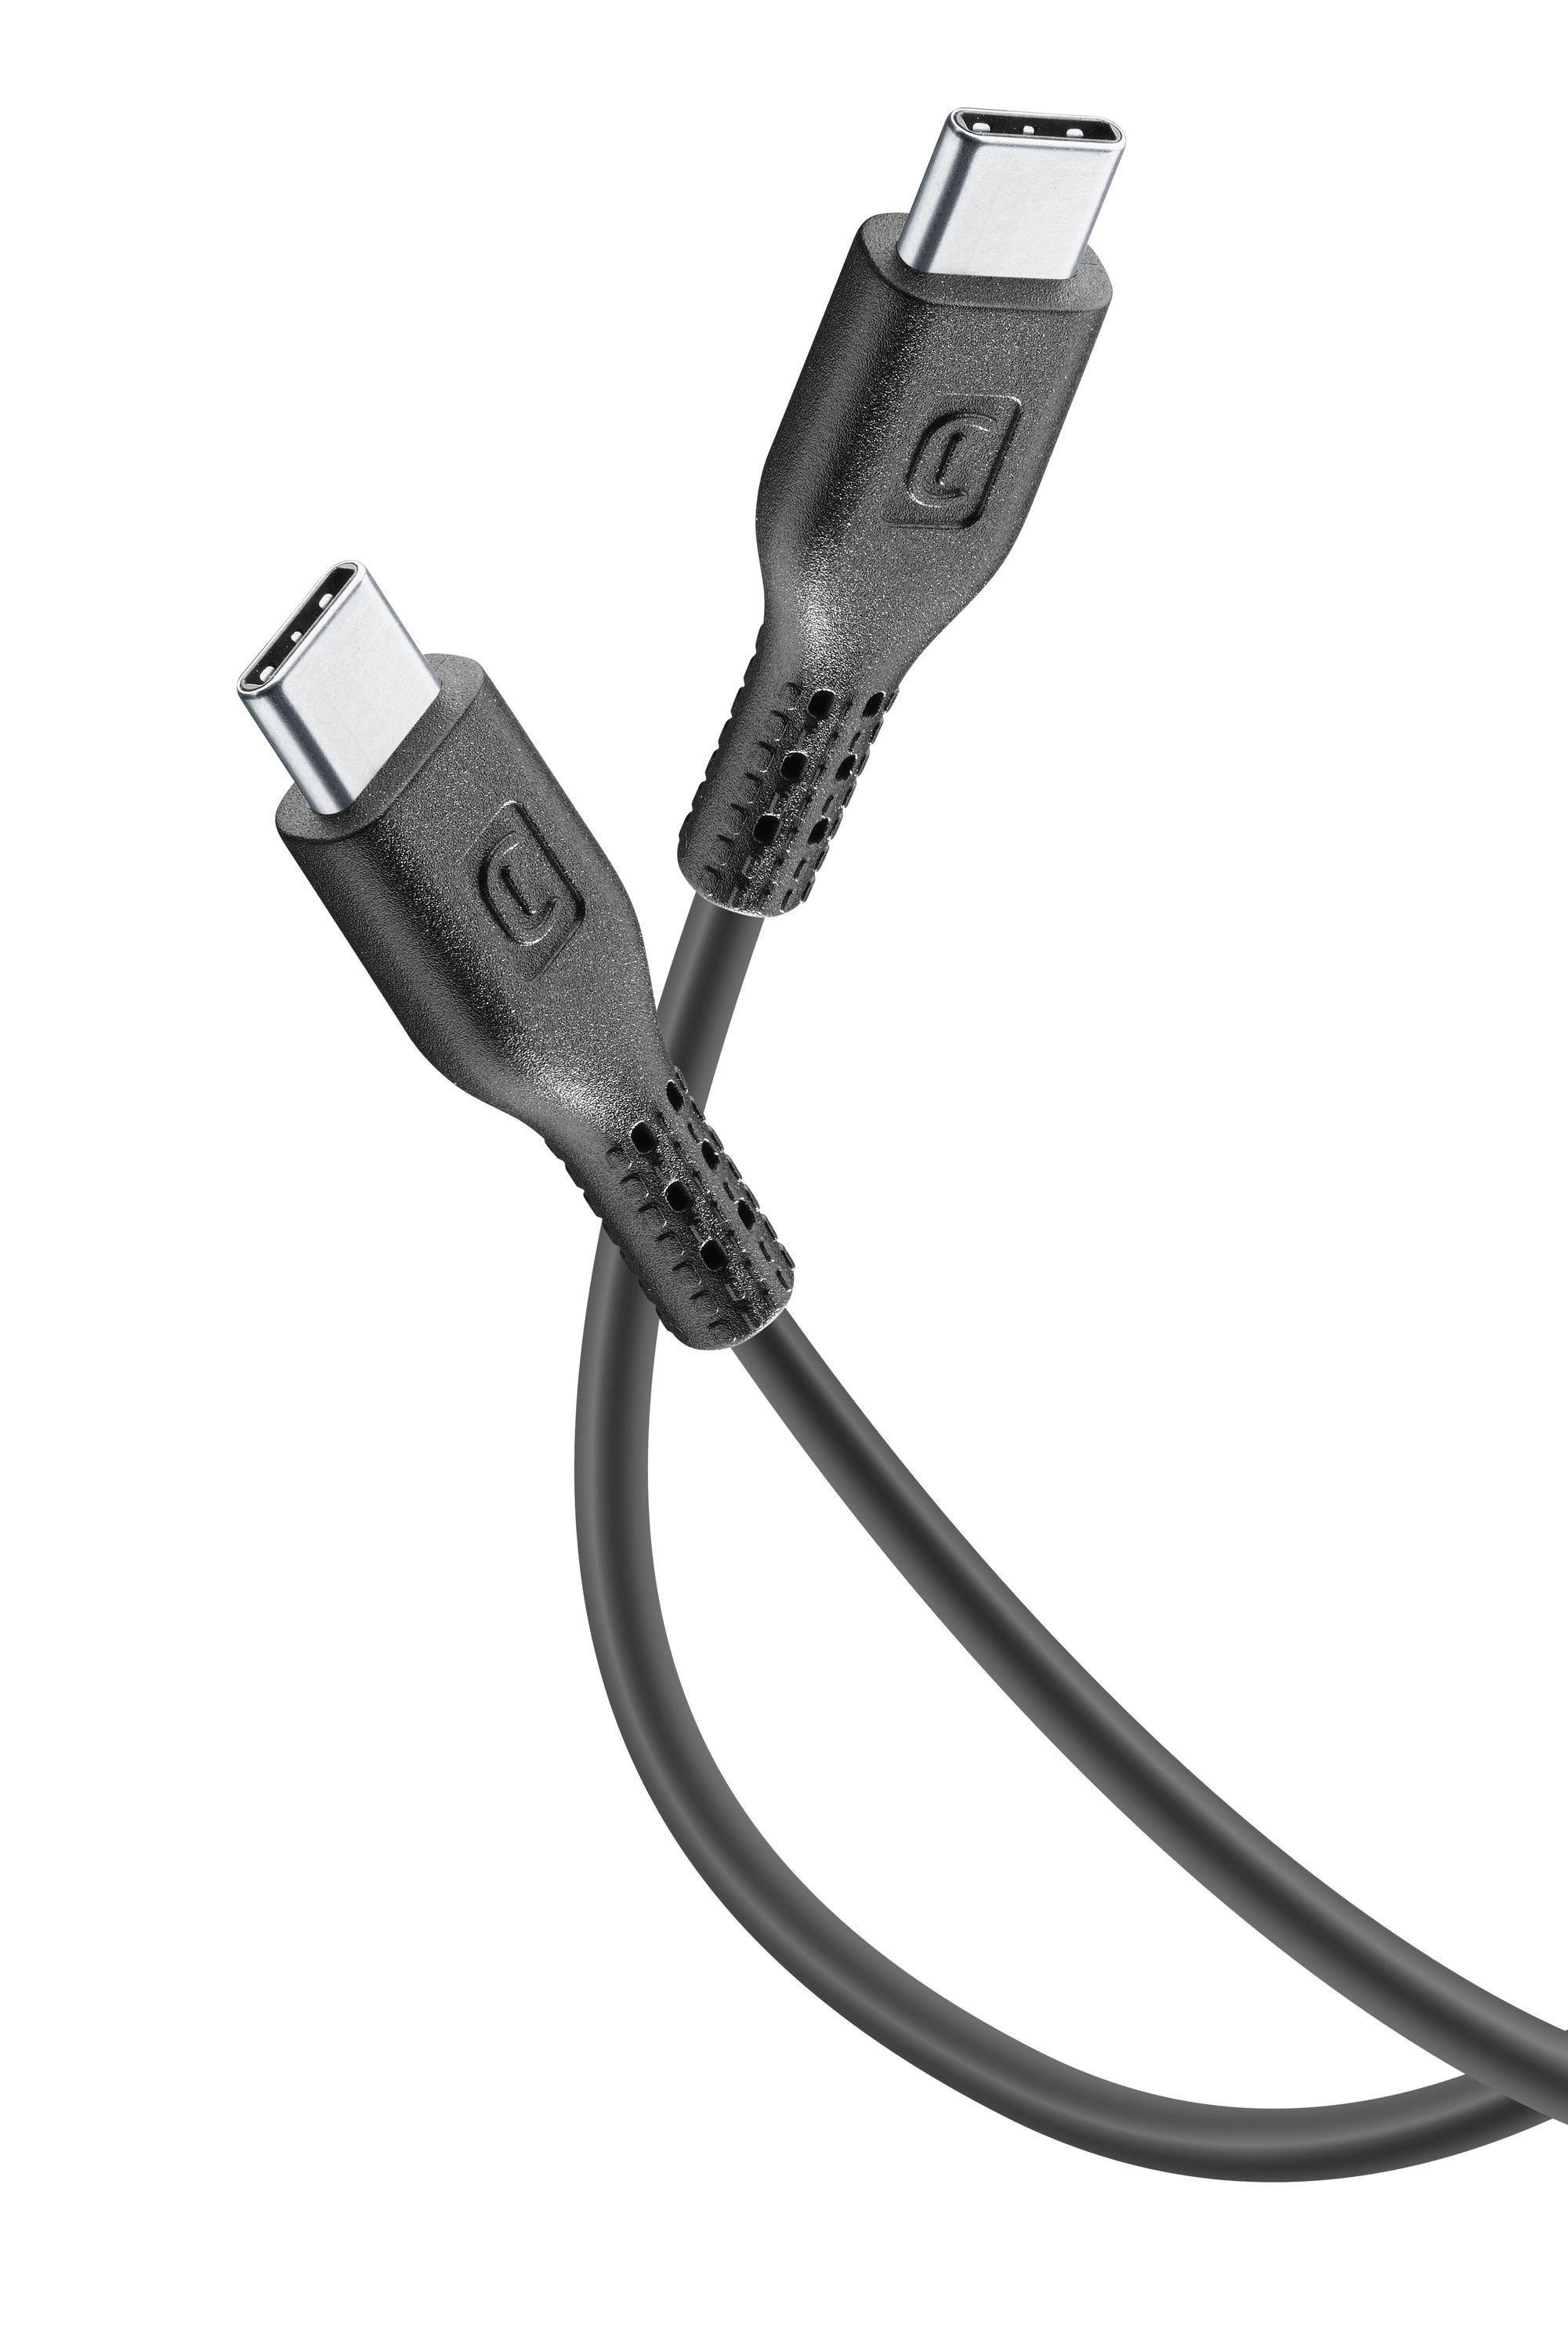 Cellular Line  USB cable 5A - USB-C to USB-C 